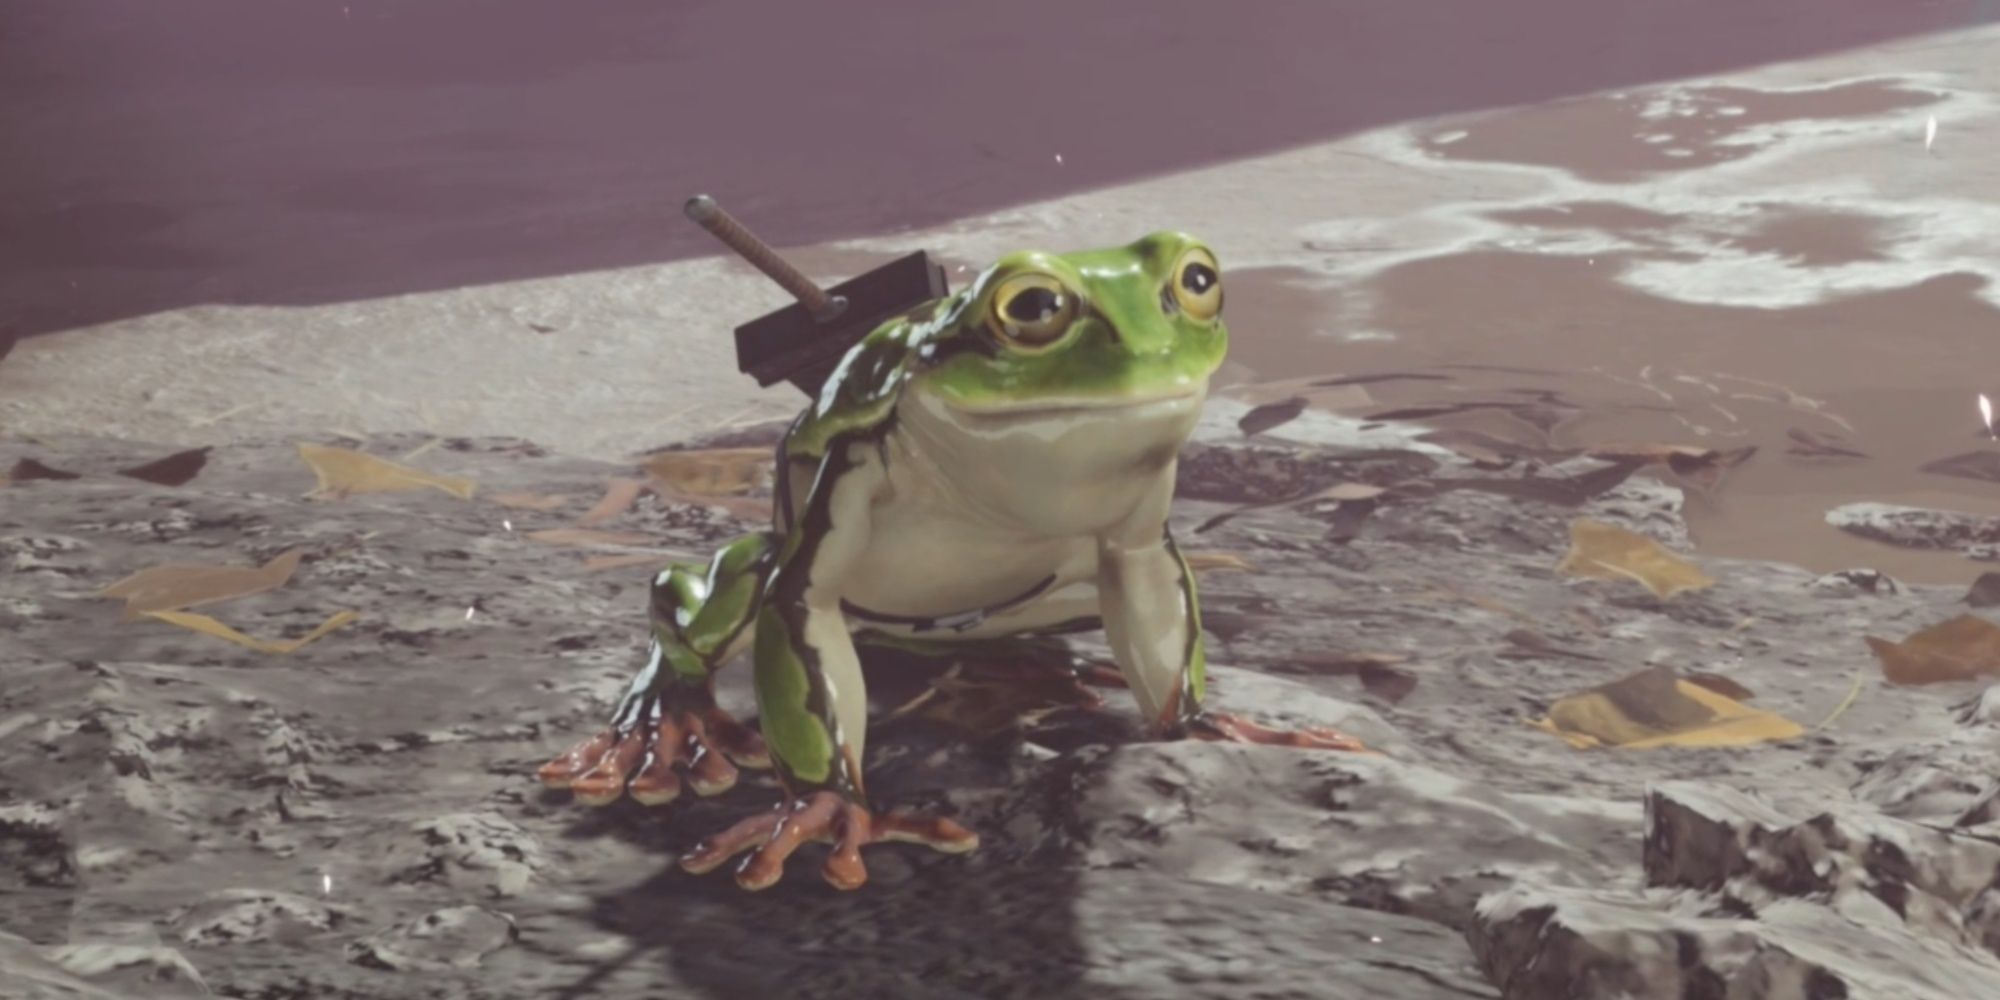 Cloud turned into a Frog during the Calling All Frogs side quest in Final Fantasy 7 Rebirth